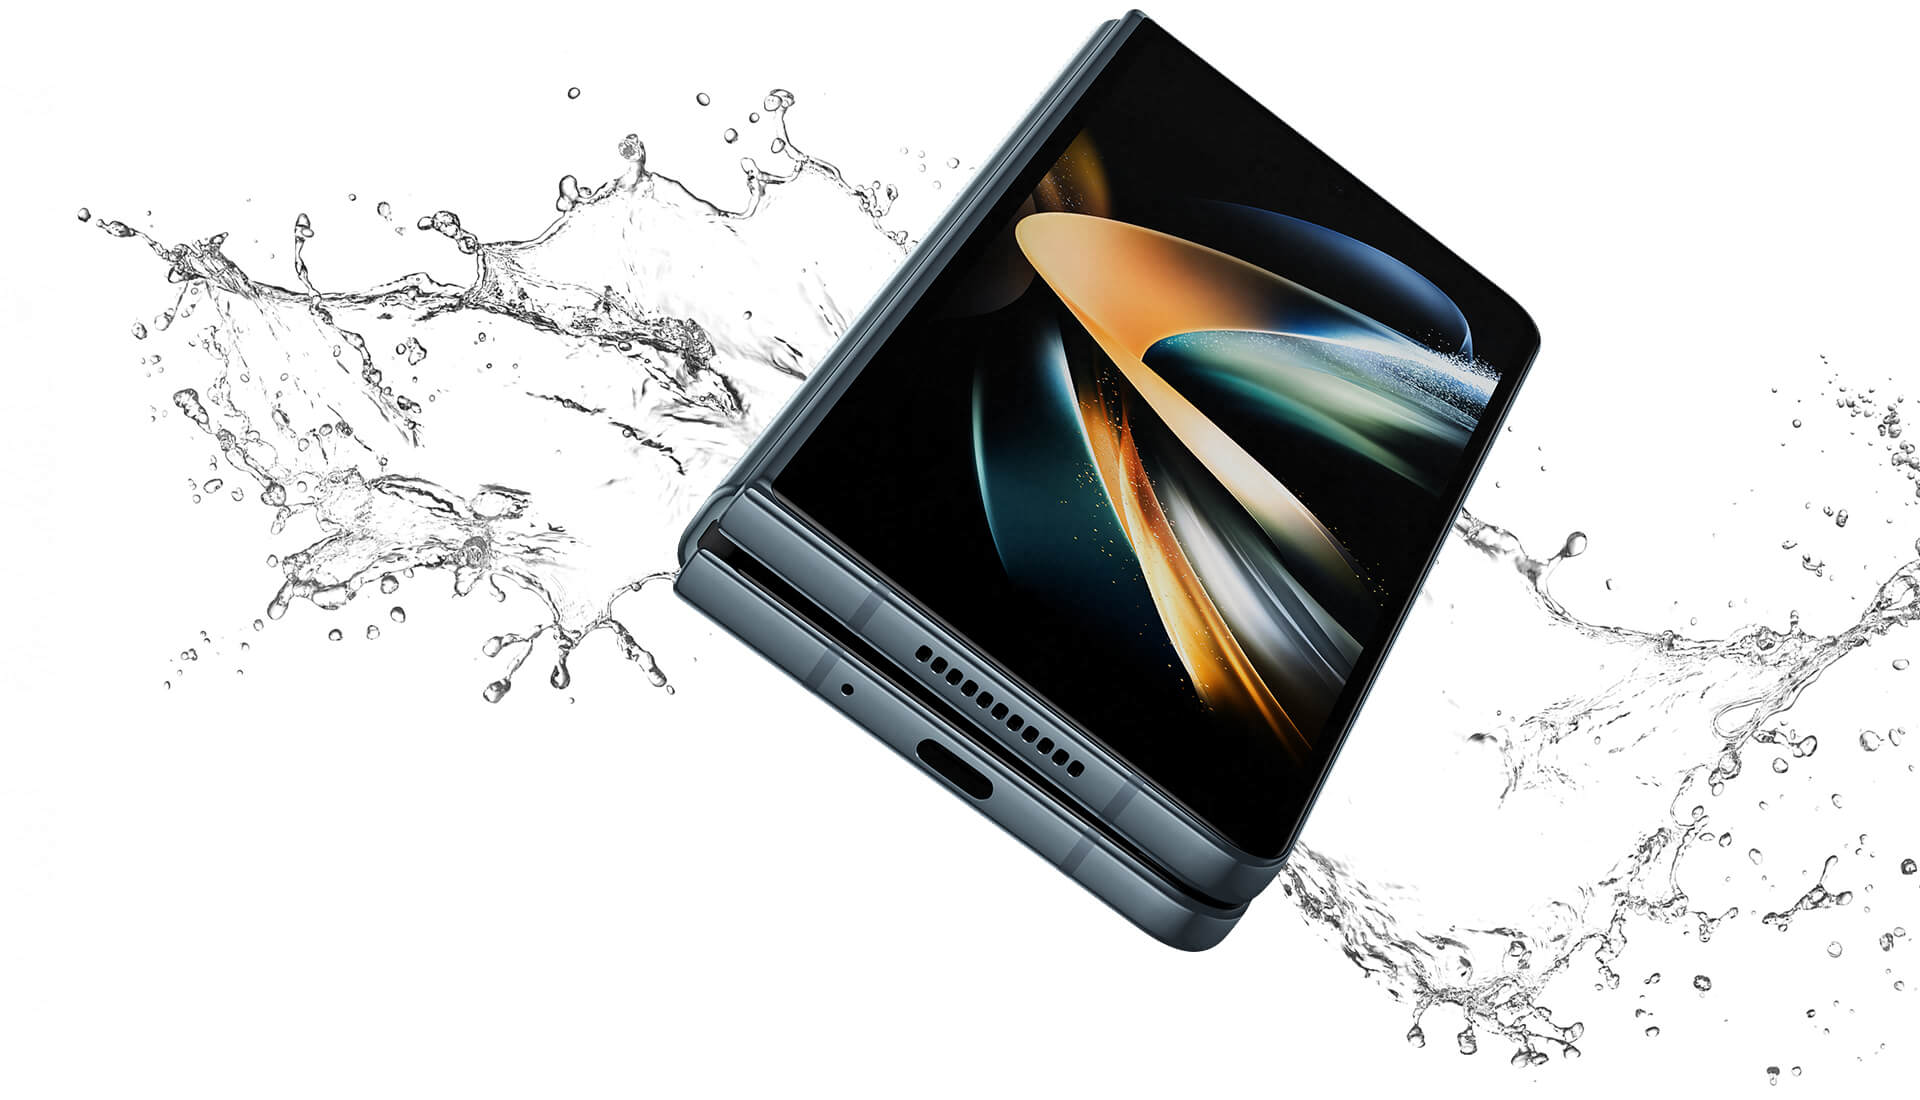 Samsung Galaxy Z Fold4, folded with screens outwards and fully flexed in the air, splashed with dramatic water effects. Equipped with IPX8 water resistance, Z Flip4, a part of the first water resistant foldable smartphone series.